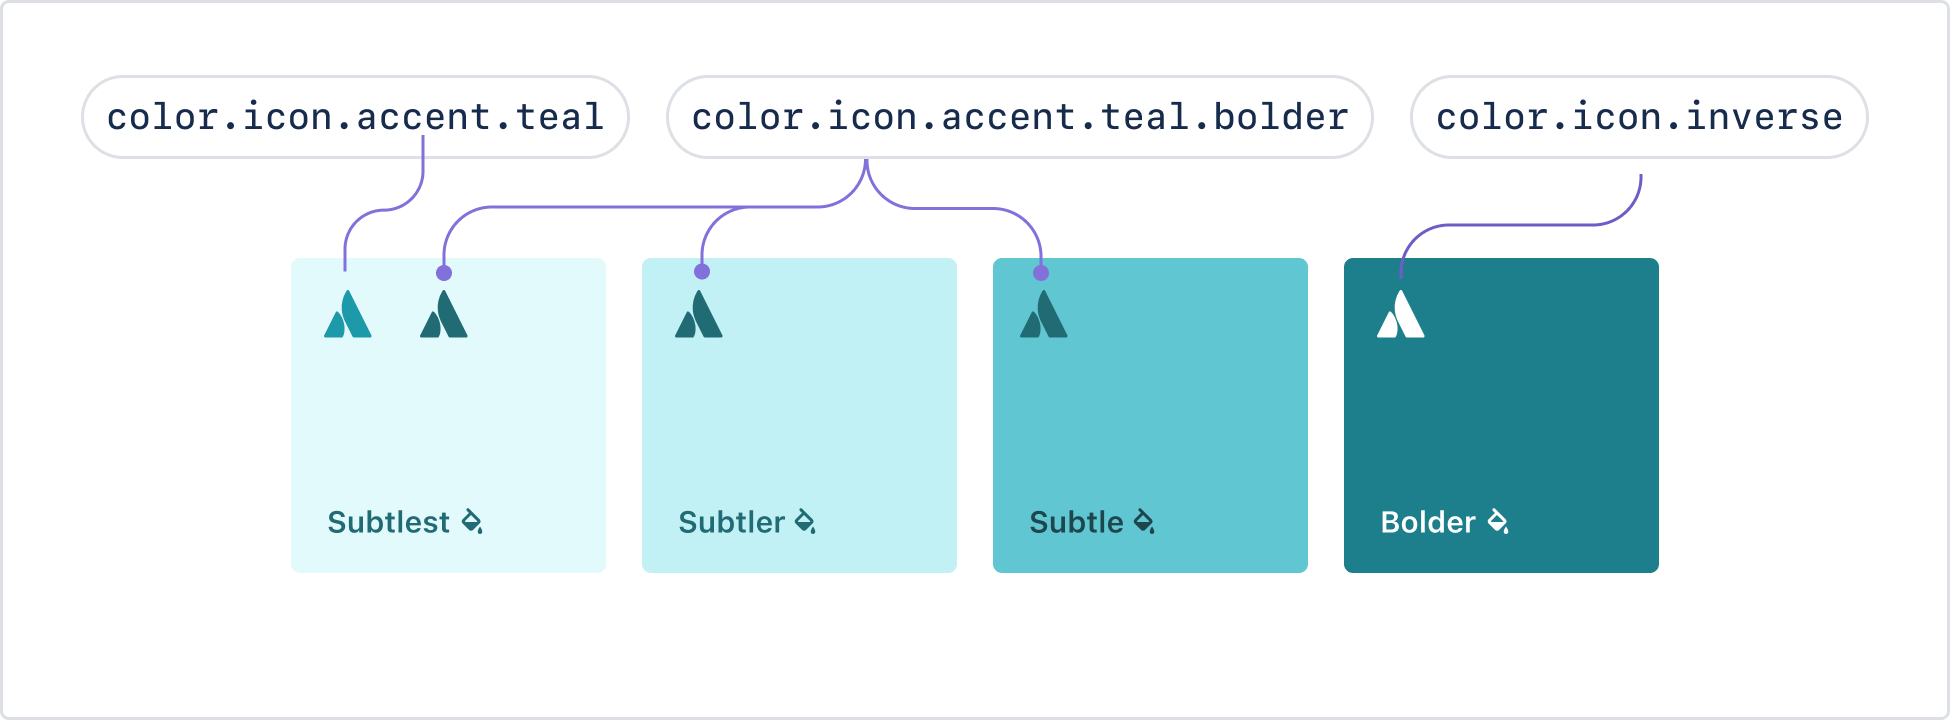 Visualization of how various teal icon and background pairings can look. Default and bolder icons appears on a subtlest background, a bolder icon appears on a subtler background, a bolder icon appears on a subtle background, and an inverse icon appears on a bolder background.